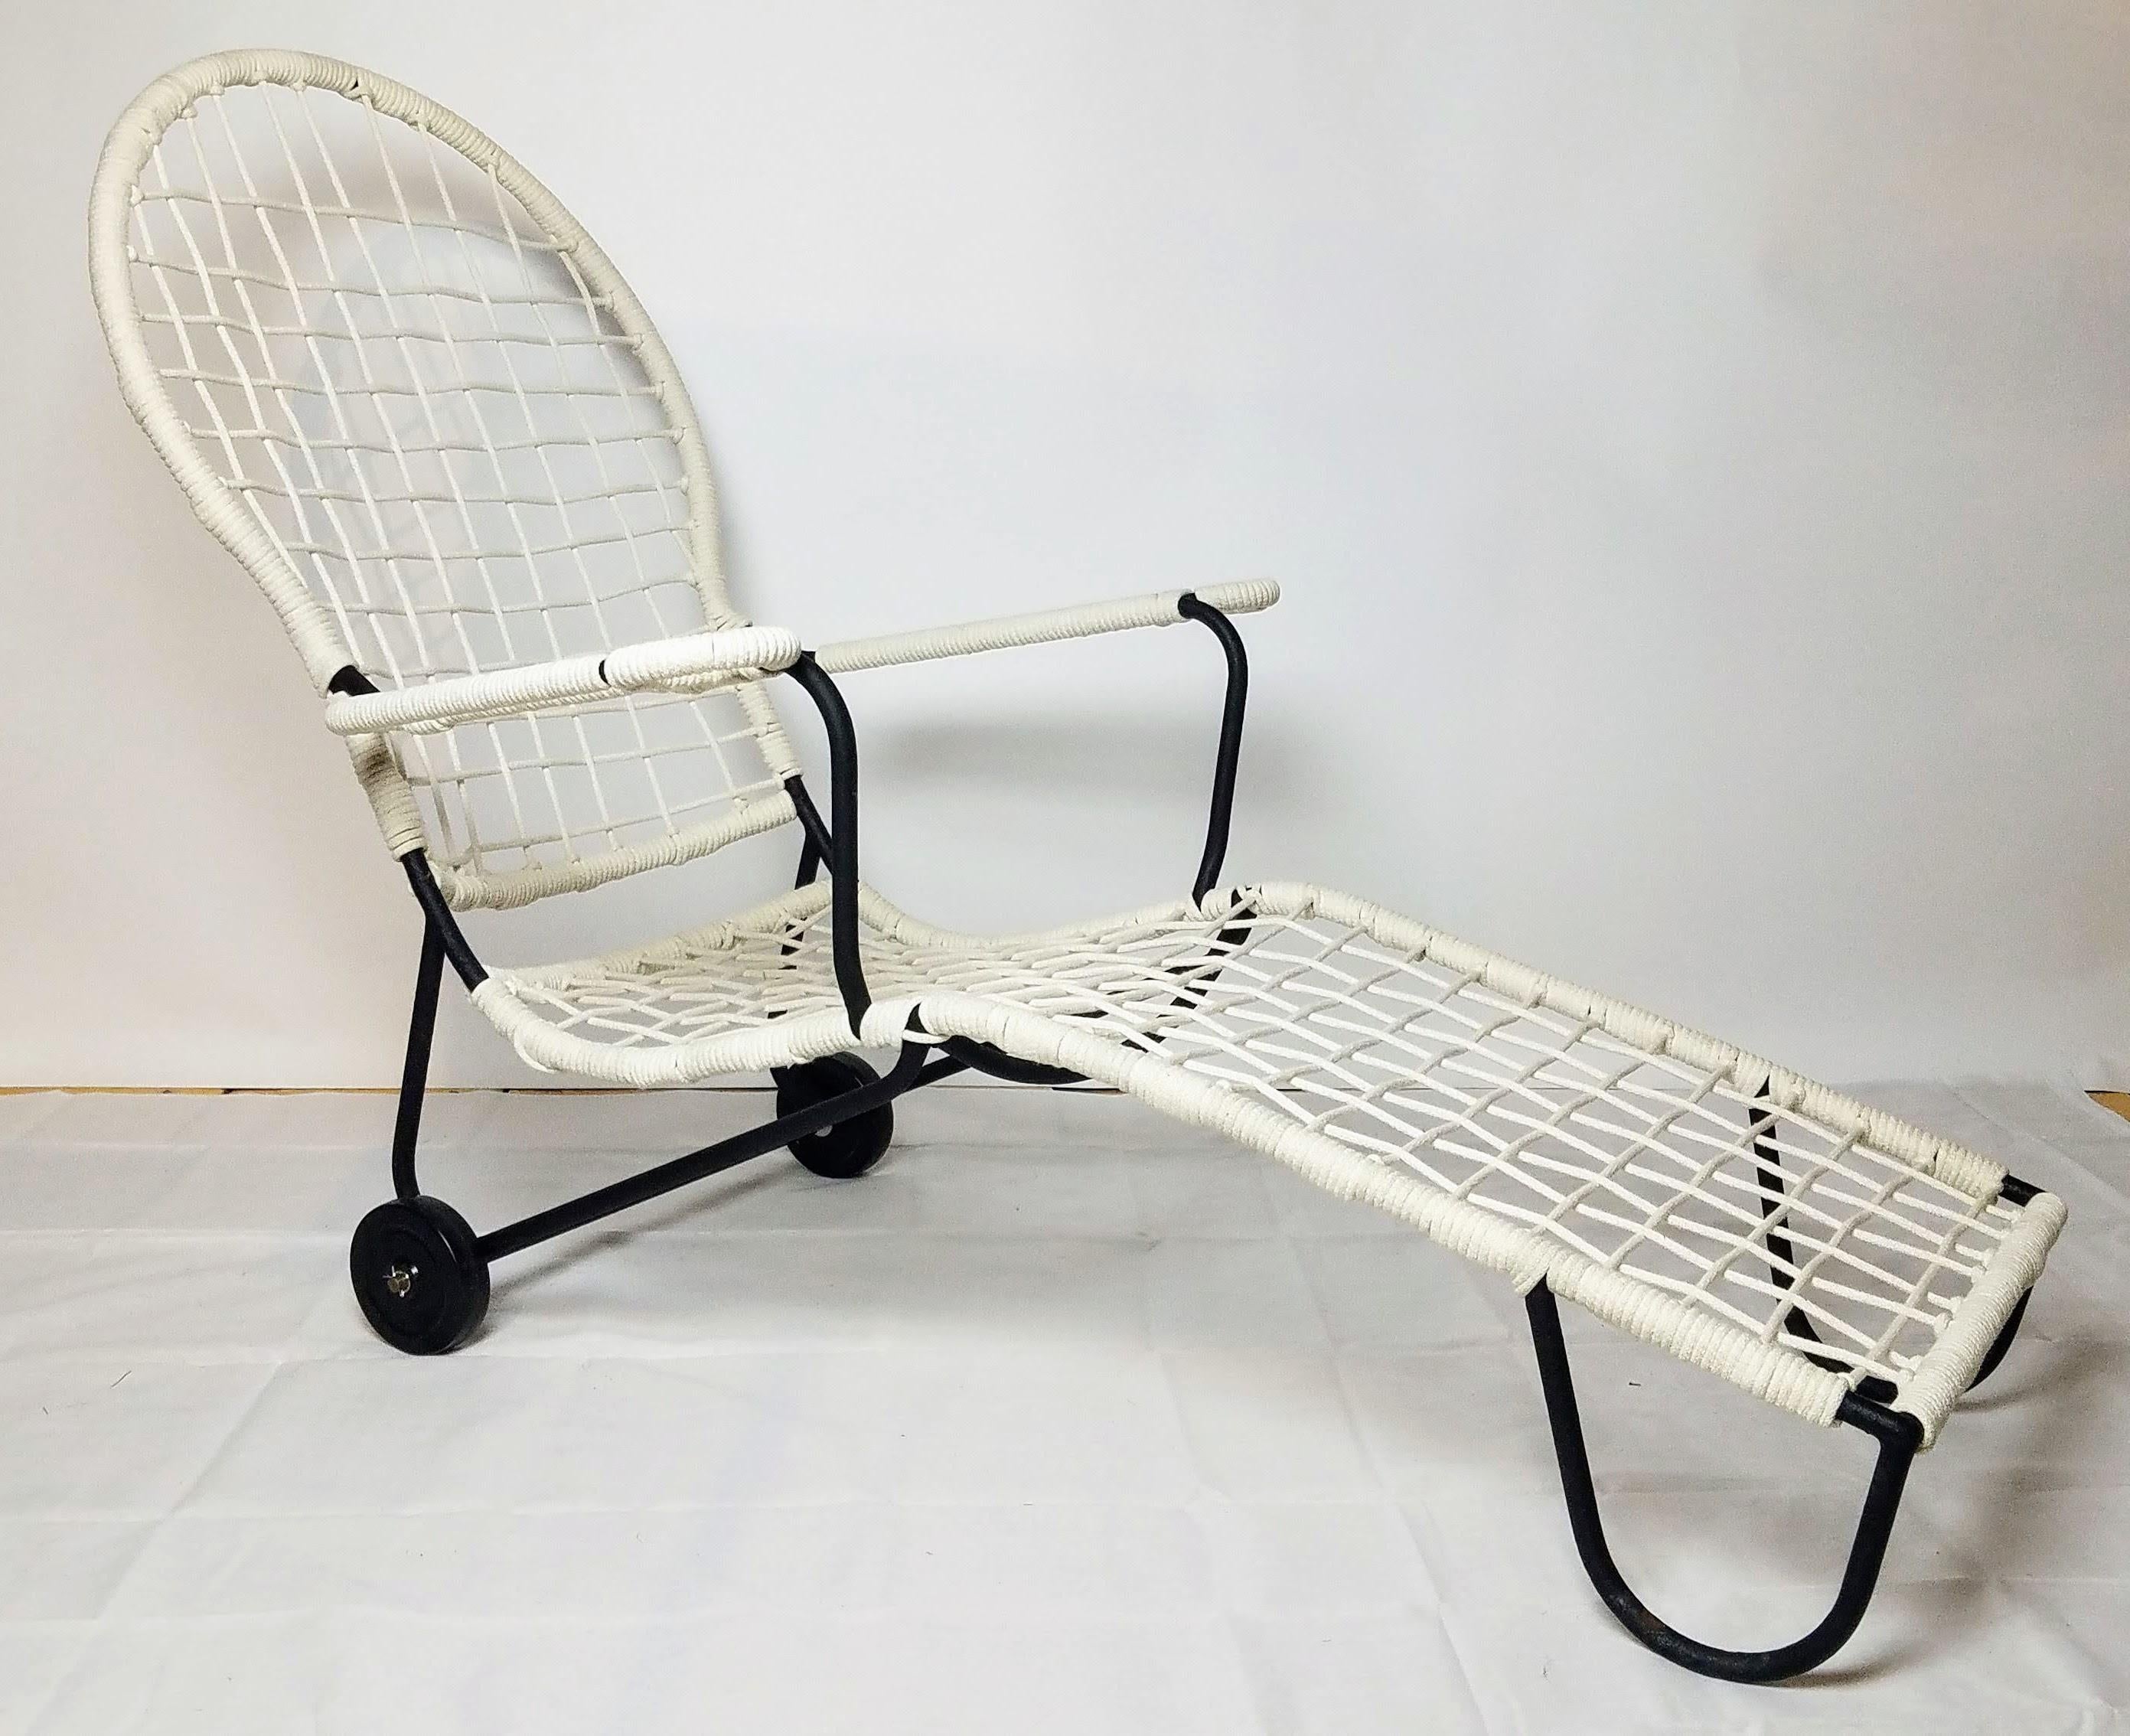 Hand-Knotted Wylie R. Dallas Texas Roped Iron Furniture Chaise 1940s San Antonio Texas For Sale